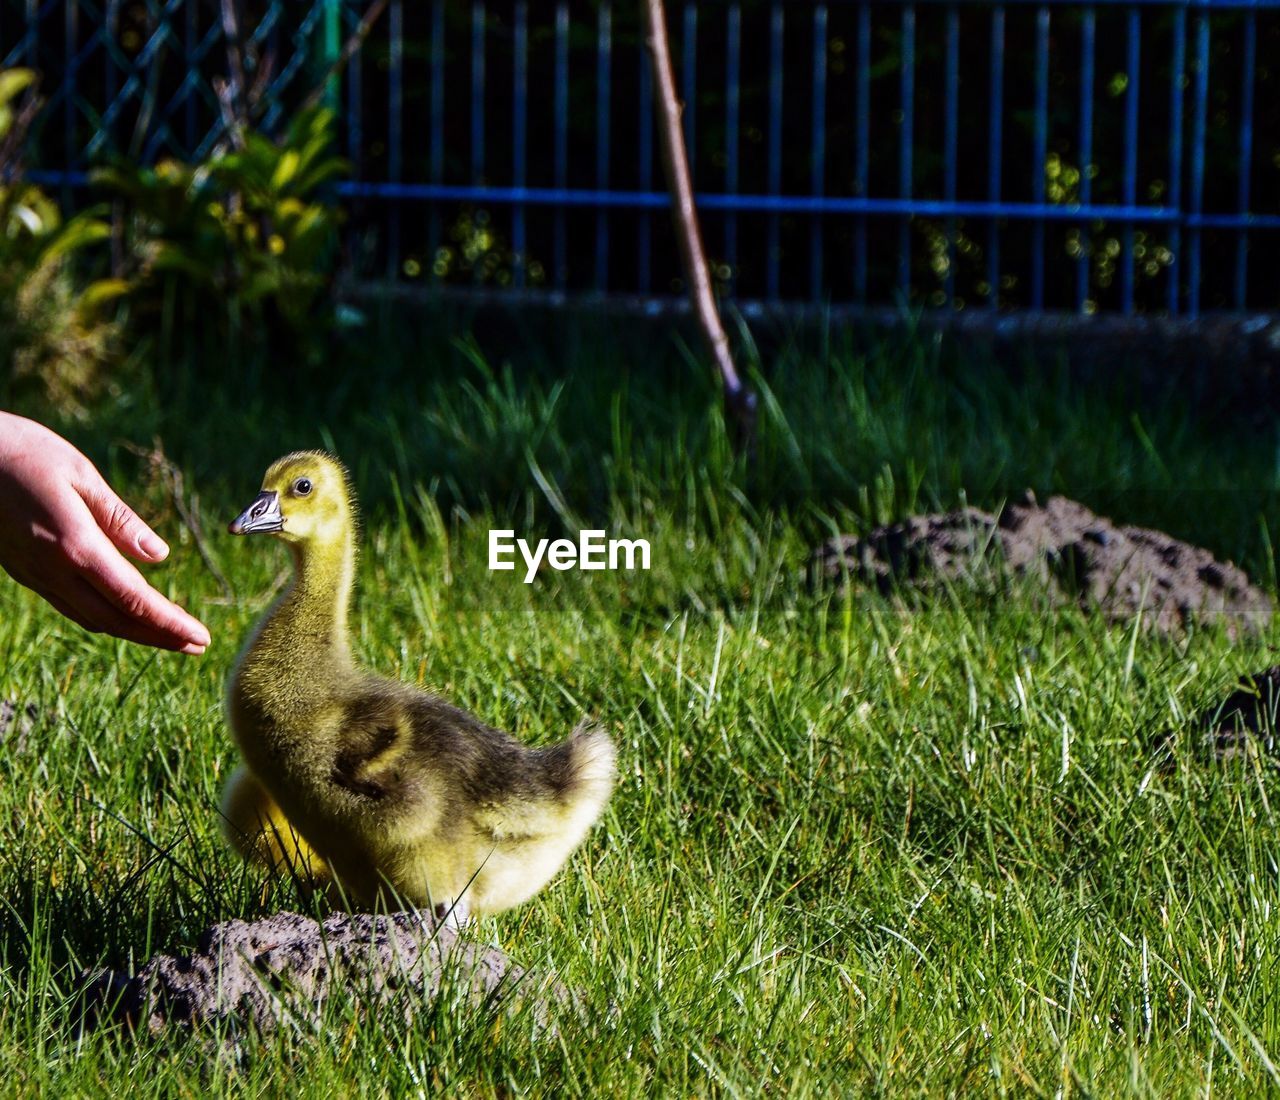 Human hand and duckling on grass